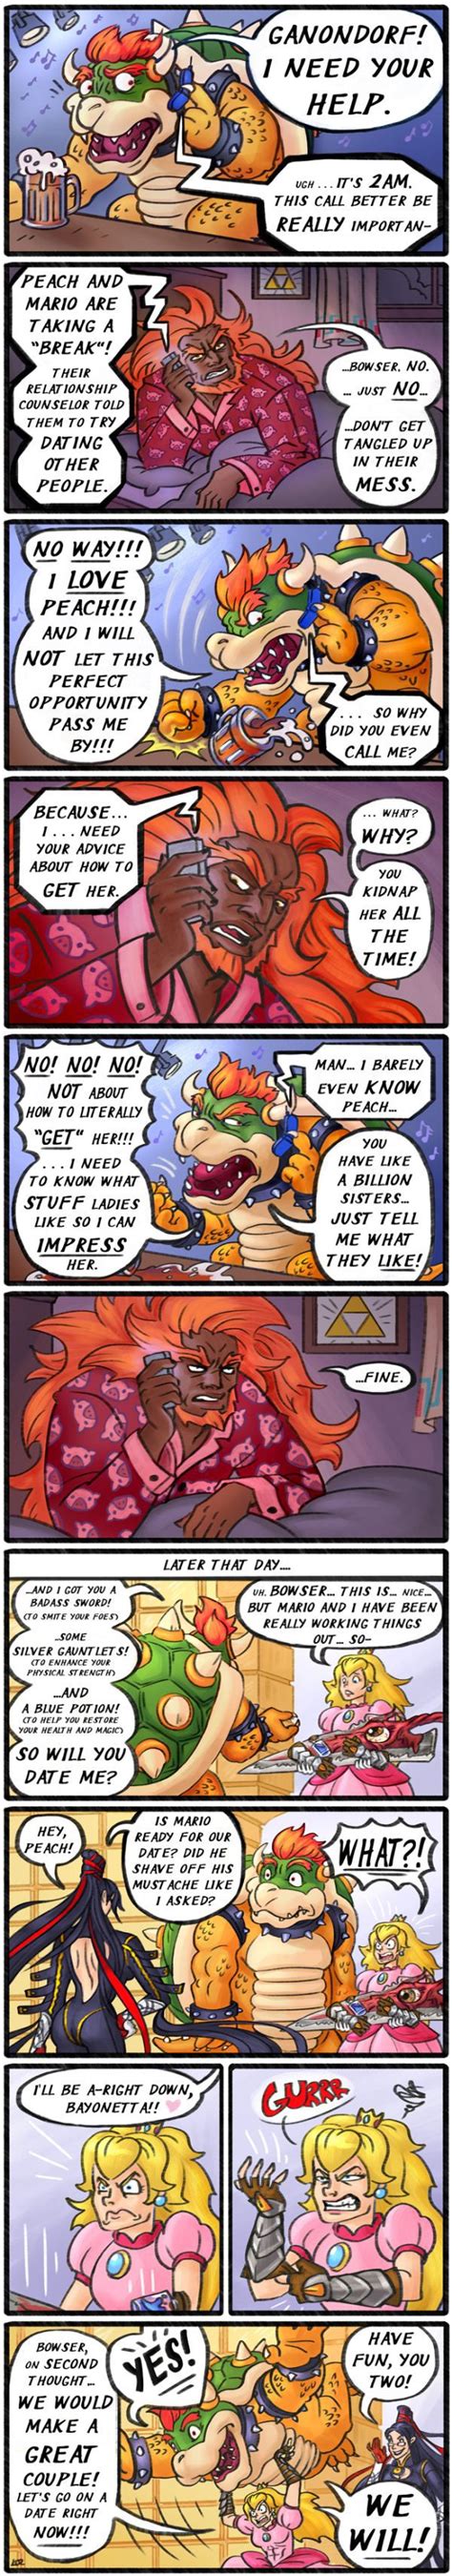 Bowser Calls Ganondorf For Help About Dating Princess